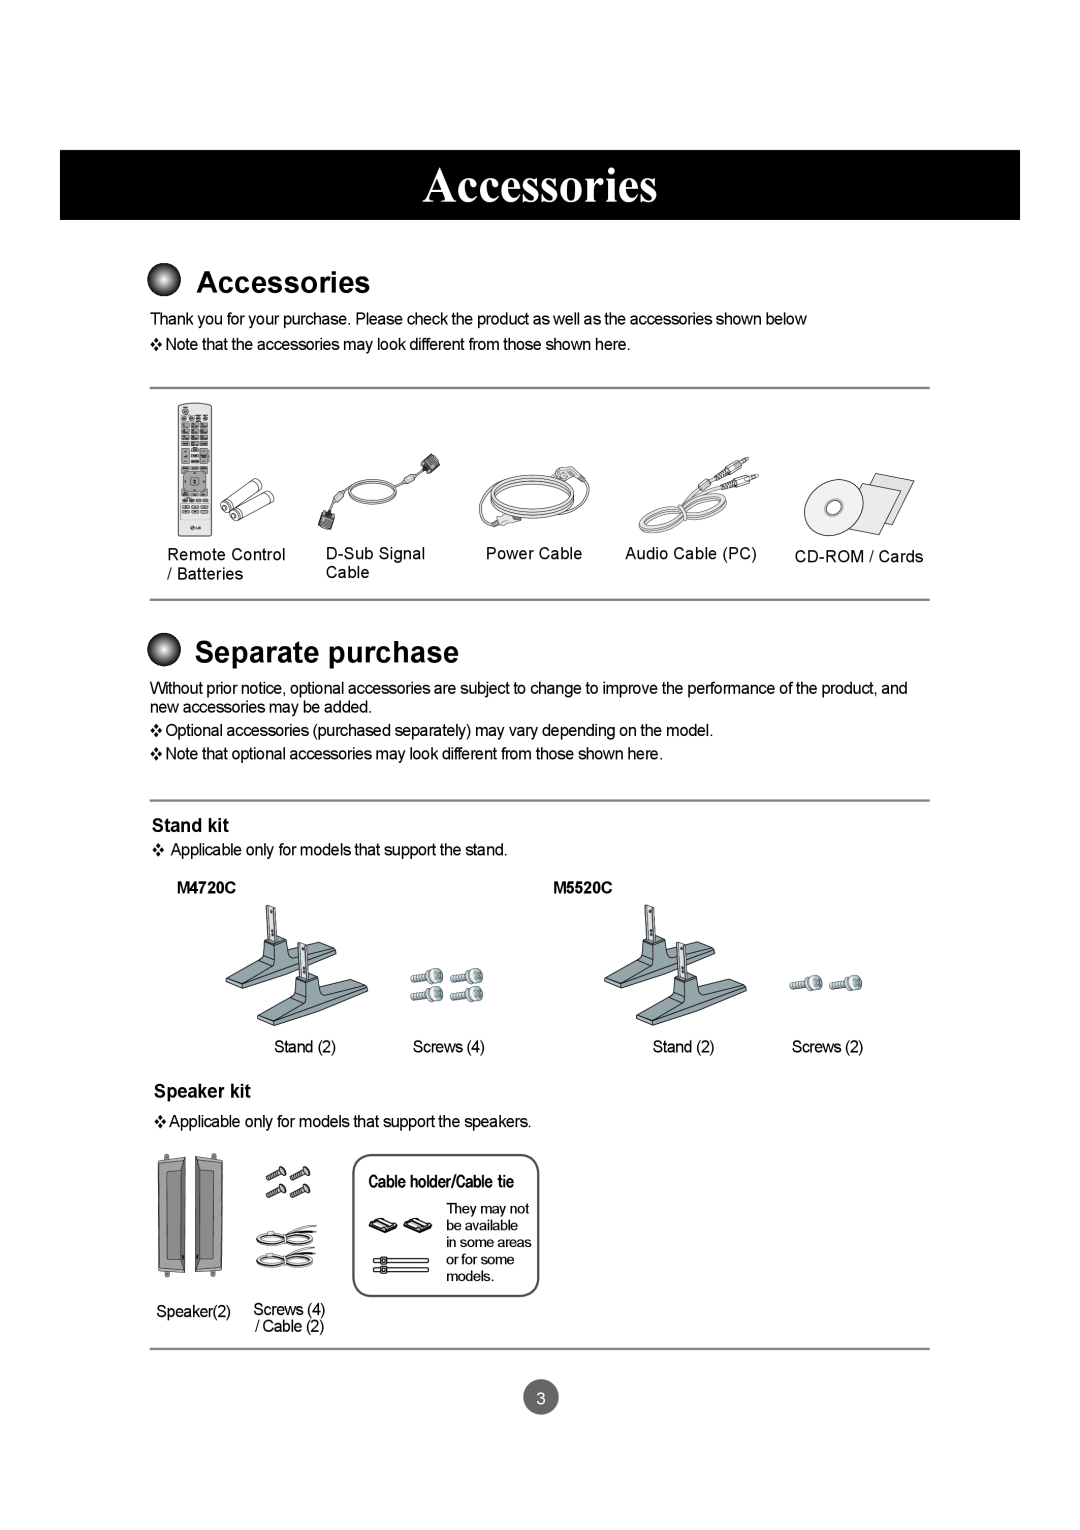 LG Electronics M5520C owner manual Accessories, Separate purchase, Stand kit, Speaker kit, M4720C 